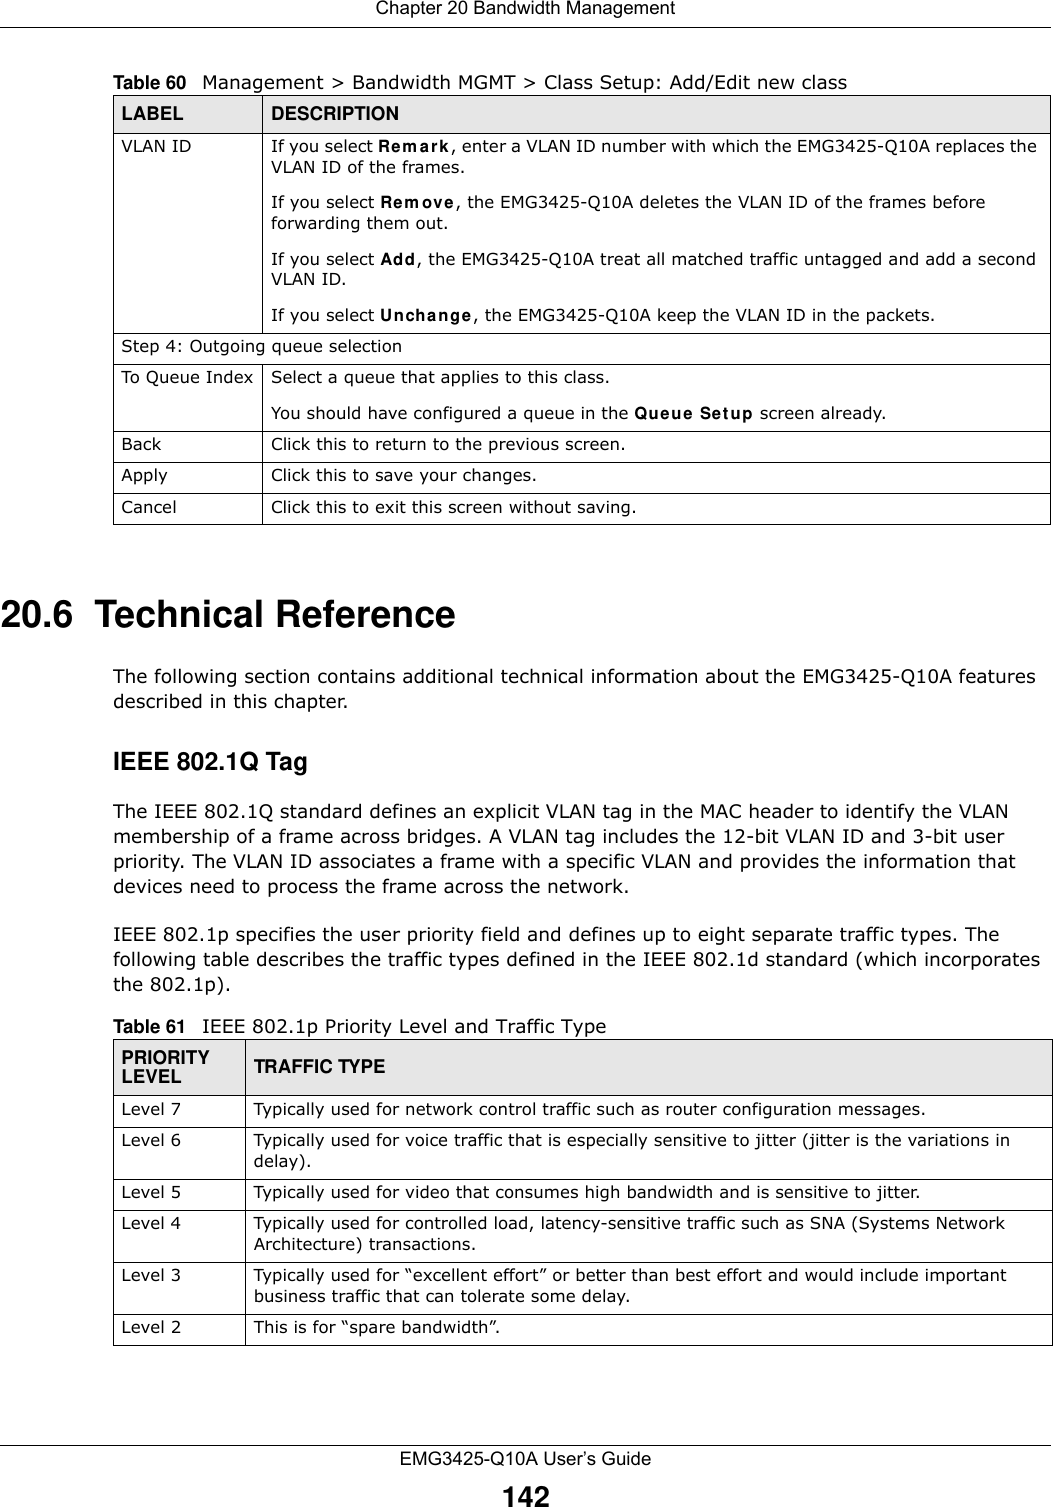 Chapter 20 Bandwidth ManagementEMG3425-Q10A User’s Guide14220.6  Technical ReferenceThe following section contains additional technical information about the EMG3425-Q10A features described in this chapter.IEEE 802.1Q TagThe IEEE 802.1Q standard defines an explicit VLAN tag in the MAC header to identify the VLAN membership of a frame across bridges. A VLAN tag includes the 12-bit VLAN ID and 3-bit user priority. The VLAN ID associates a frame with a specific VLAN and provides the information that devices need to process the frame across the network. IEEE 802.1p specifies the user priority field and defines up to eight separate traffic types. The following table describes the traffic types defined in the IEEE 802.1d standard (which incorporates the 802.1p).  VLAN ID If you select Rem ark , enter a VLAN ID number with which the EMG3425-Q10A replaces the VLAN ID of the frames.If you select Rem ove, the EMG3425-Q10A deletes the VLAN ID of the frames before forwarding them out.If you select Add, the EMG3425-Q10A treat all matched traffic untagged and add a second VLAN ID.If you select Uncha nge, the EMG3425-Q10A keep the VLAN ID in the packets.Step 4: Outgoing queue selectionTo Queue Index Select a queue that applies to this class.You should have configured a queue in the Queue  Se t up screen already.Back Click this to return to the previous screen.Apply Click this to save your changes.Cancel Click this to exit this screen without saving.Table 60   Management &gt; Bandwidth MGMT &gt; Class Setup: Add/Edit new classLABEL DESCRIPTIONTable 61   IEEE 802.1p Priority Level and Traffic TypePRIORITY LEVEL TRAFFIC TYPELevel 7 Typically used for network control traffic such as router configuration messages.Level 6 Typically used for voice traffic that is especially sensitive to jitter (jitter is the variations in delay).Level 5 Typically used for video that consumes high bandwidth and is sensitive to jitter.Level 4 Typically used for controlled load, latency-sensitive traffic such as SNA (Systems Network Architecture) transactions.Level 3 Typically used for “excellent effort” or better than best effort and would include important business traffic that can tolerate some delay.Level 2 This is for “spare bandwidth”. 